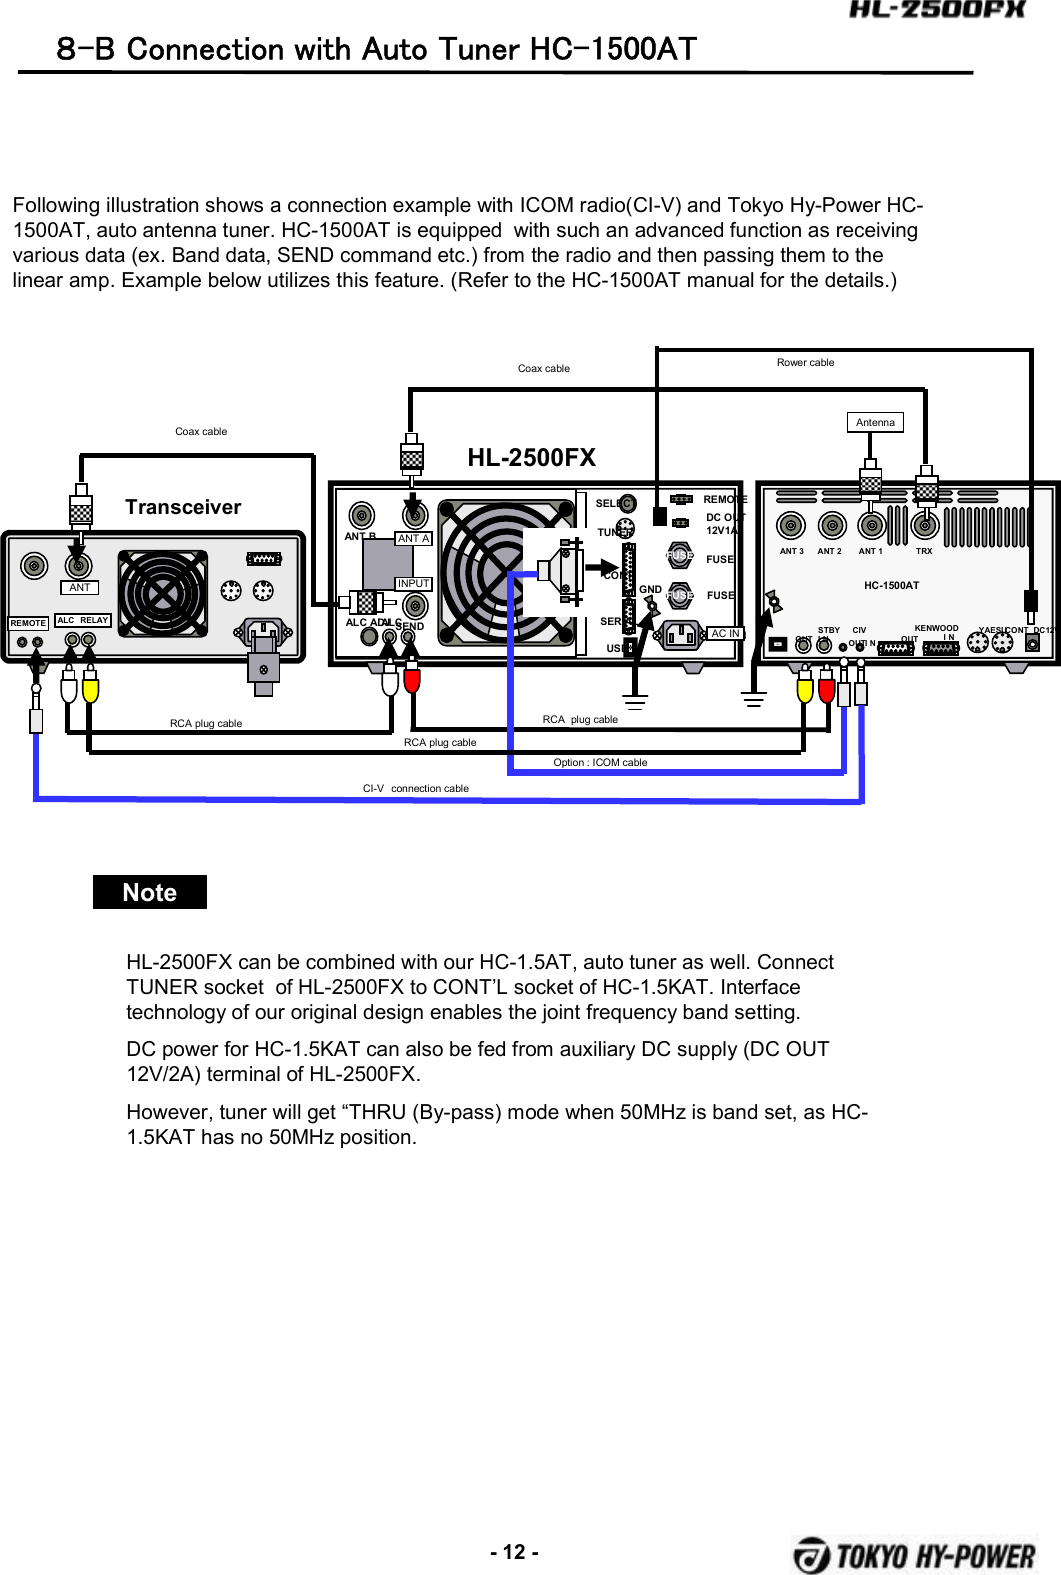 -12 -Following illustration shows a connection example with ICOM radio(CI-V) and Tokyo Hy-Power HC-1500AT, auto antenna tuner. HC-1500AT is equipped  with such an advanced function as receiving various data (ex. Band data, SEND command etc.) from the radio and then passing them to the linear amp. Example below utilizes this feature. (Refer to the HC-1500AT manual for the details.)FUSEFUSEANT B ANT AINPUTALC ADJALCSENDTUNERSELECTAC INFUSEFUSEREMOTEDC OUT12V1ACONTSERIALUSBGNDANT AINPUTAC INANTALC RELAYTransceiverHL-2500FXCoax cableRCA plug cableREMOTEOption : ICOM cableANT 3 ANT 2 ANT 1CONTYAESUKENWOODI NTRXOUTCIVSTBYI NOUTI NOUTDC12VAntennaHC-1500ATRCA plug cableRCA plug cableCI-V connection cableCoax cable Rower cable８-B Connection with Auto Tuner HC-1500ATNoteHL-2500FX can be combined with our HC-1.5AT, auto tuner as well. Connect TUNER socket  of HL-2500FX to CONT’L socket of HC-1.5KAT. Interface technology of our original design enables the joint frequency band setting.DC power for HC-1.5KAT can also be fed from auxiliary DC supply (DC OUT 12V/2A) terminal of HL-2500FX.However, tuner will get “THRU (By-pass) mode when 50MHz is band set, as HC-1.5KAT has no 50MHz position.